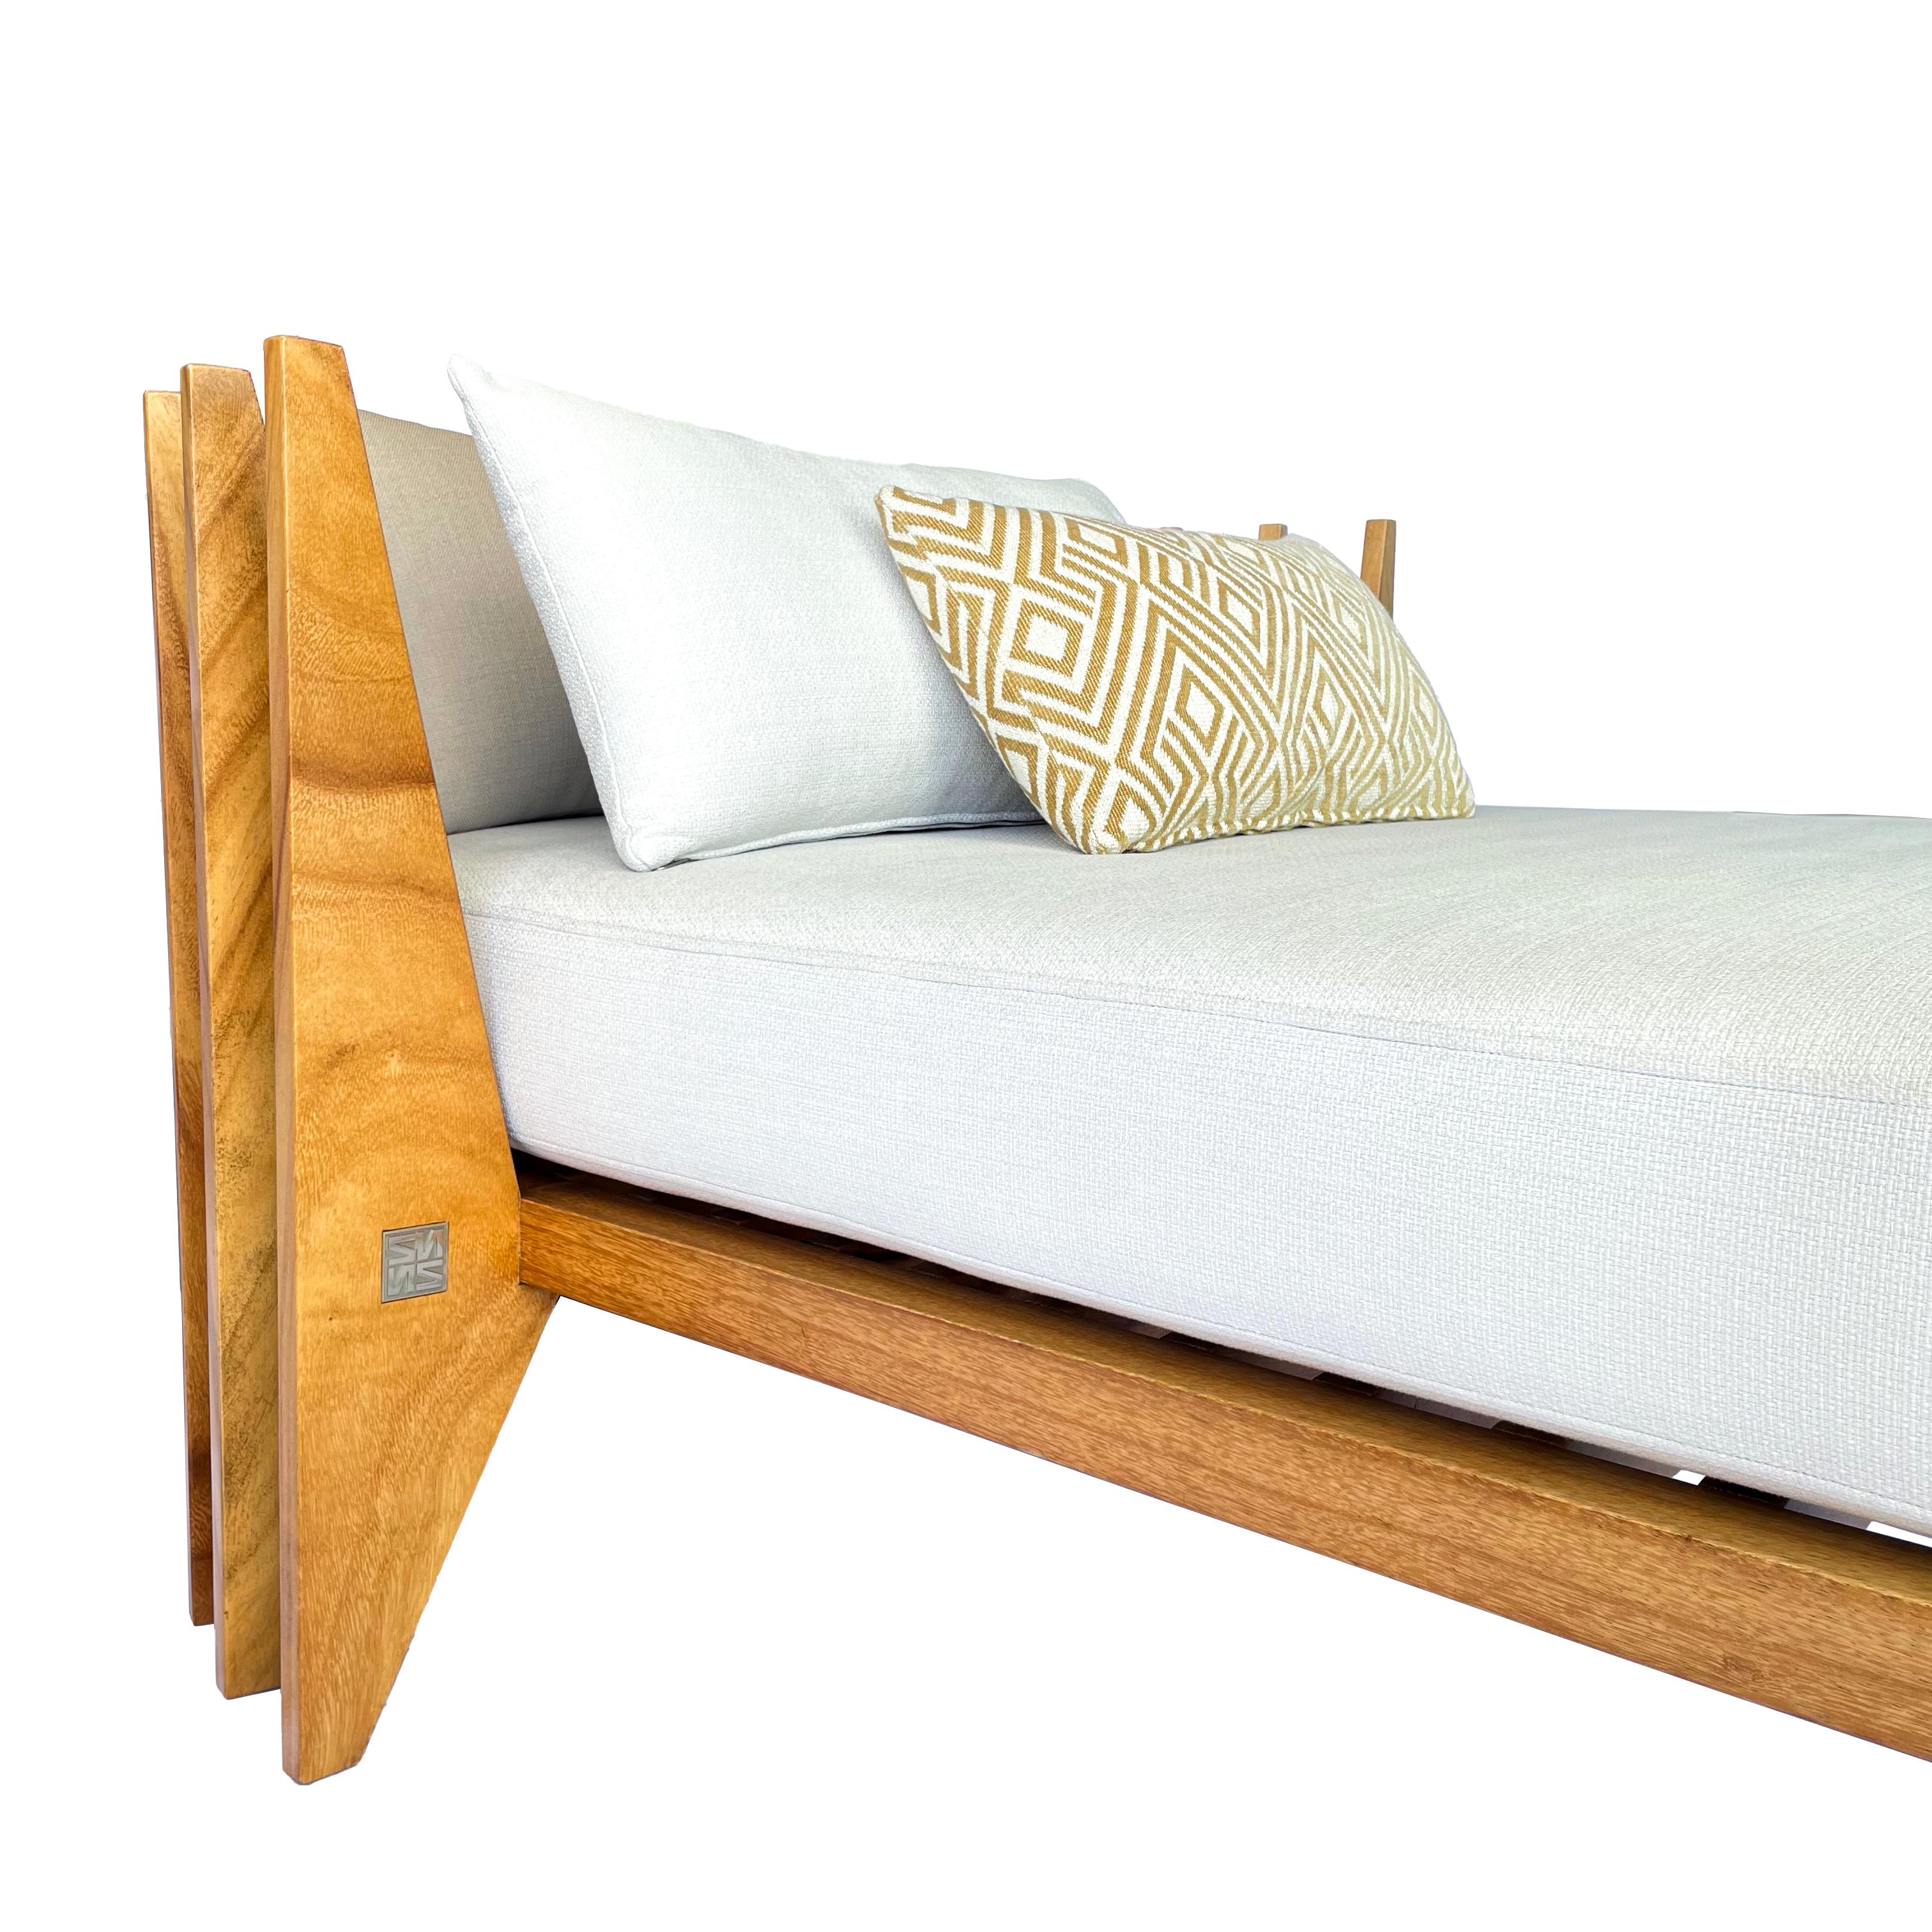 Hand-Crafted Modern Wood Day Bed by Pierre Sarkis For Sale